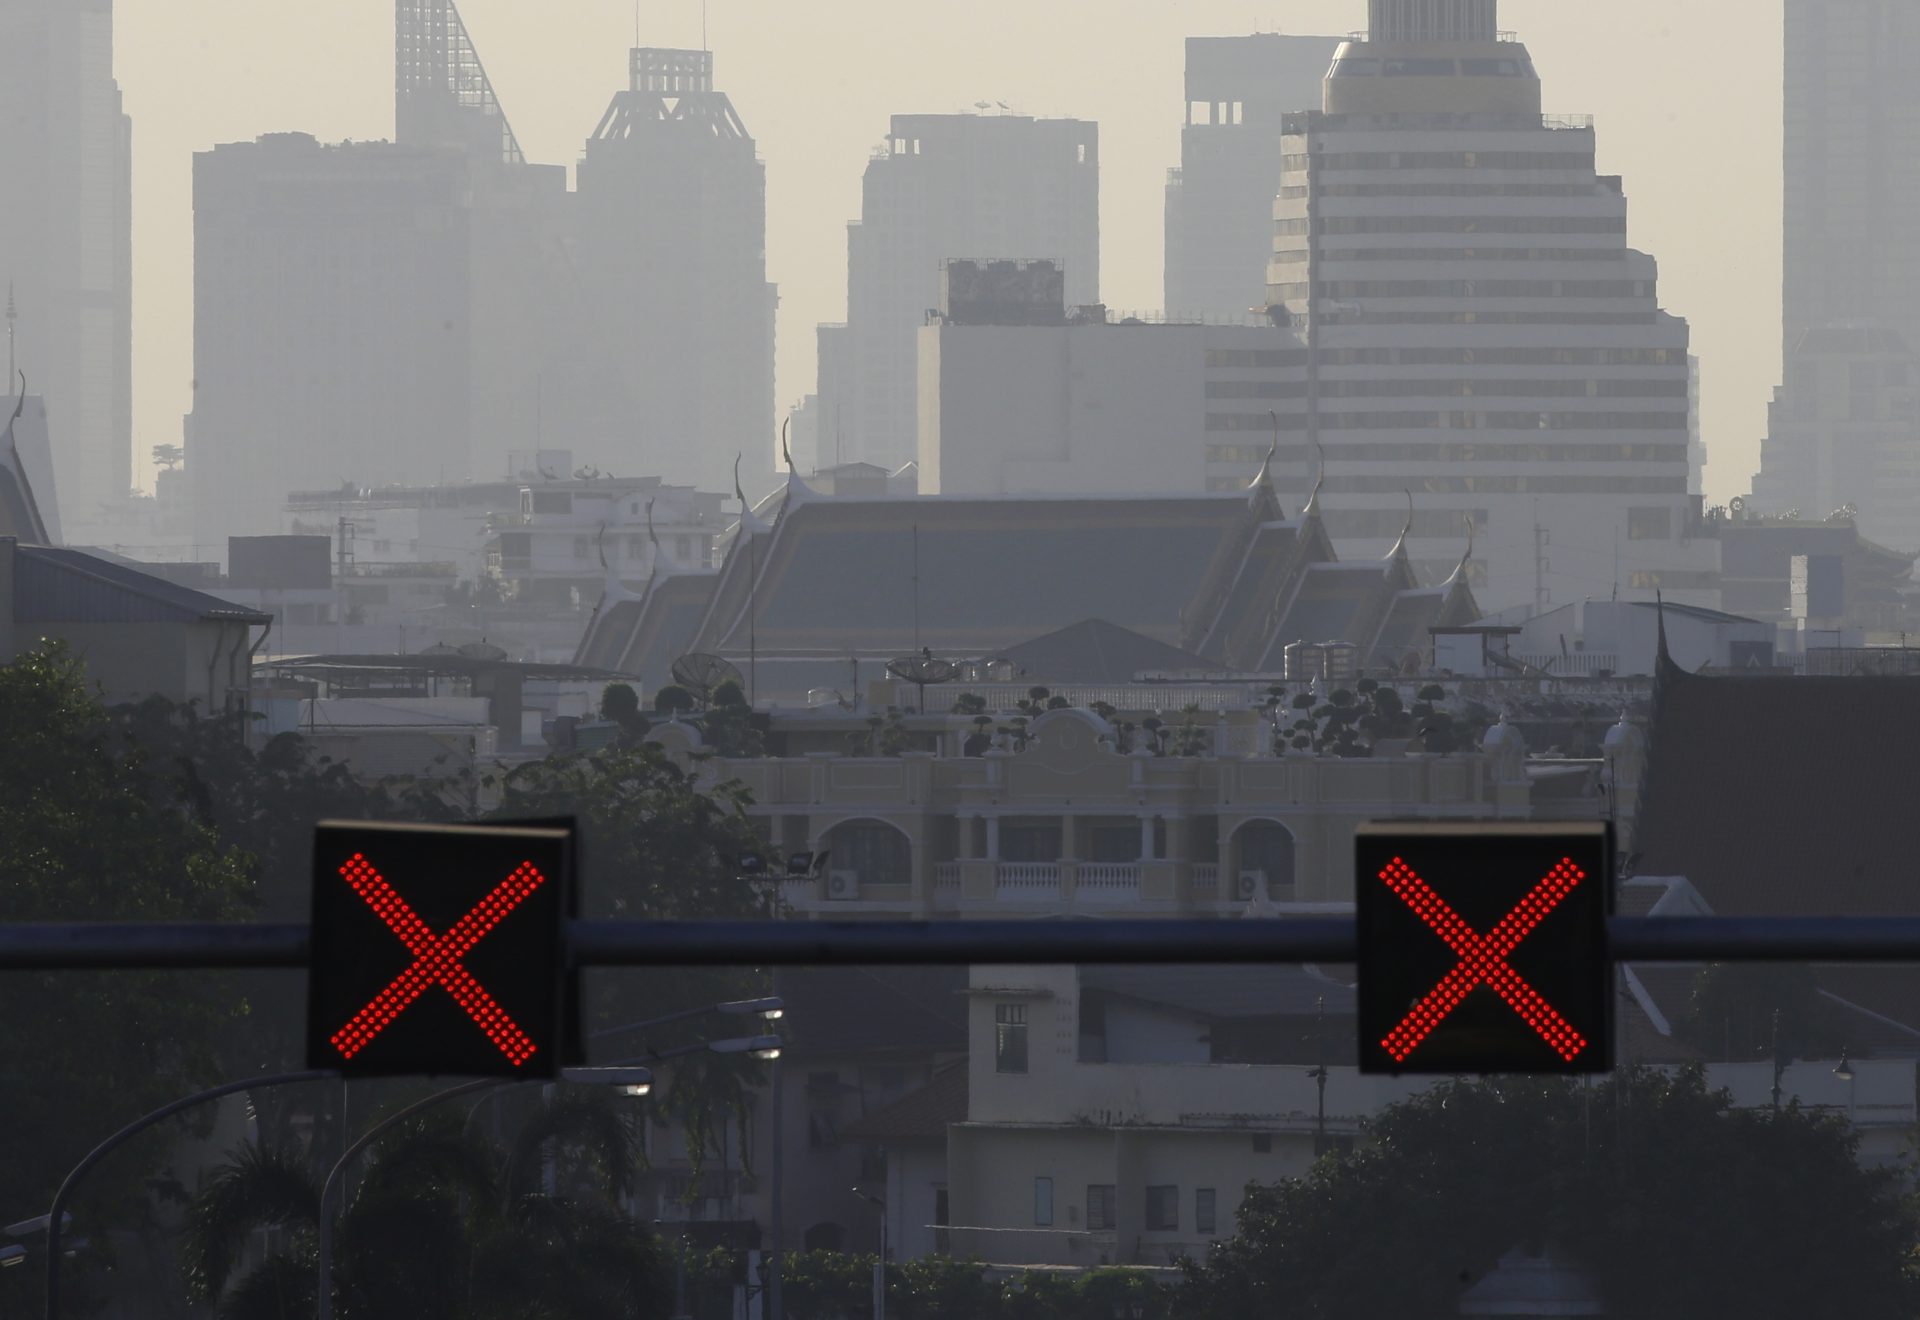 Bangkok (Thailand), 16/01/2024.- Air pollution of fine particulate matter (PM2.5) begins to cover the skyline, in Bangkok, Thailand, 16 January 2024. The Pollution Control Department of Thailand issued public alerts about air pollution caused by PM2.5 particulate matter, stating that it may reach harmful levels in many places in Bangkok and many other provinces in Thailand from 17 to 22 January 2024. The agency anticipates PM2.5 levels to hover between 19.3 to 54.7 micrograms per m3, higher than the level considered safe for Thailand, after 12 provinces exceeded the safe standard on 16 January 2024. (Tailandia) EFE/EPA/NARONG SANGNAK